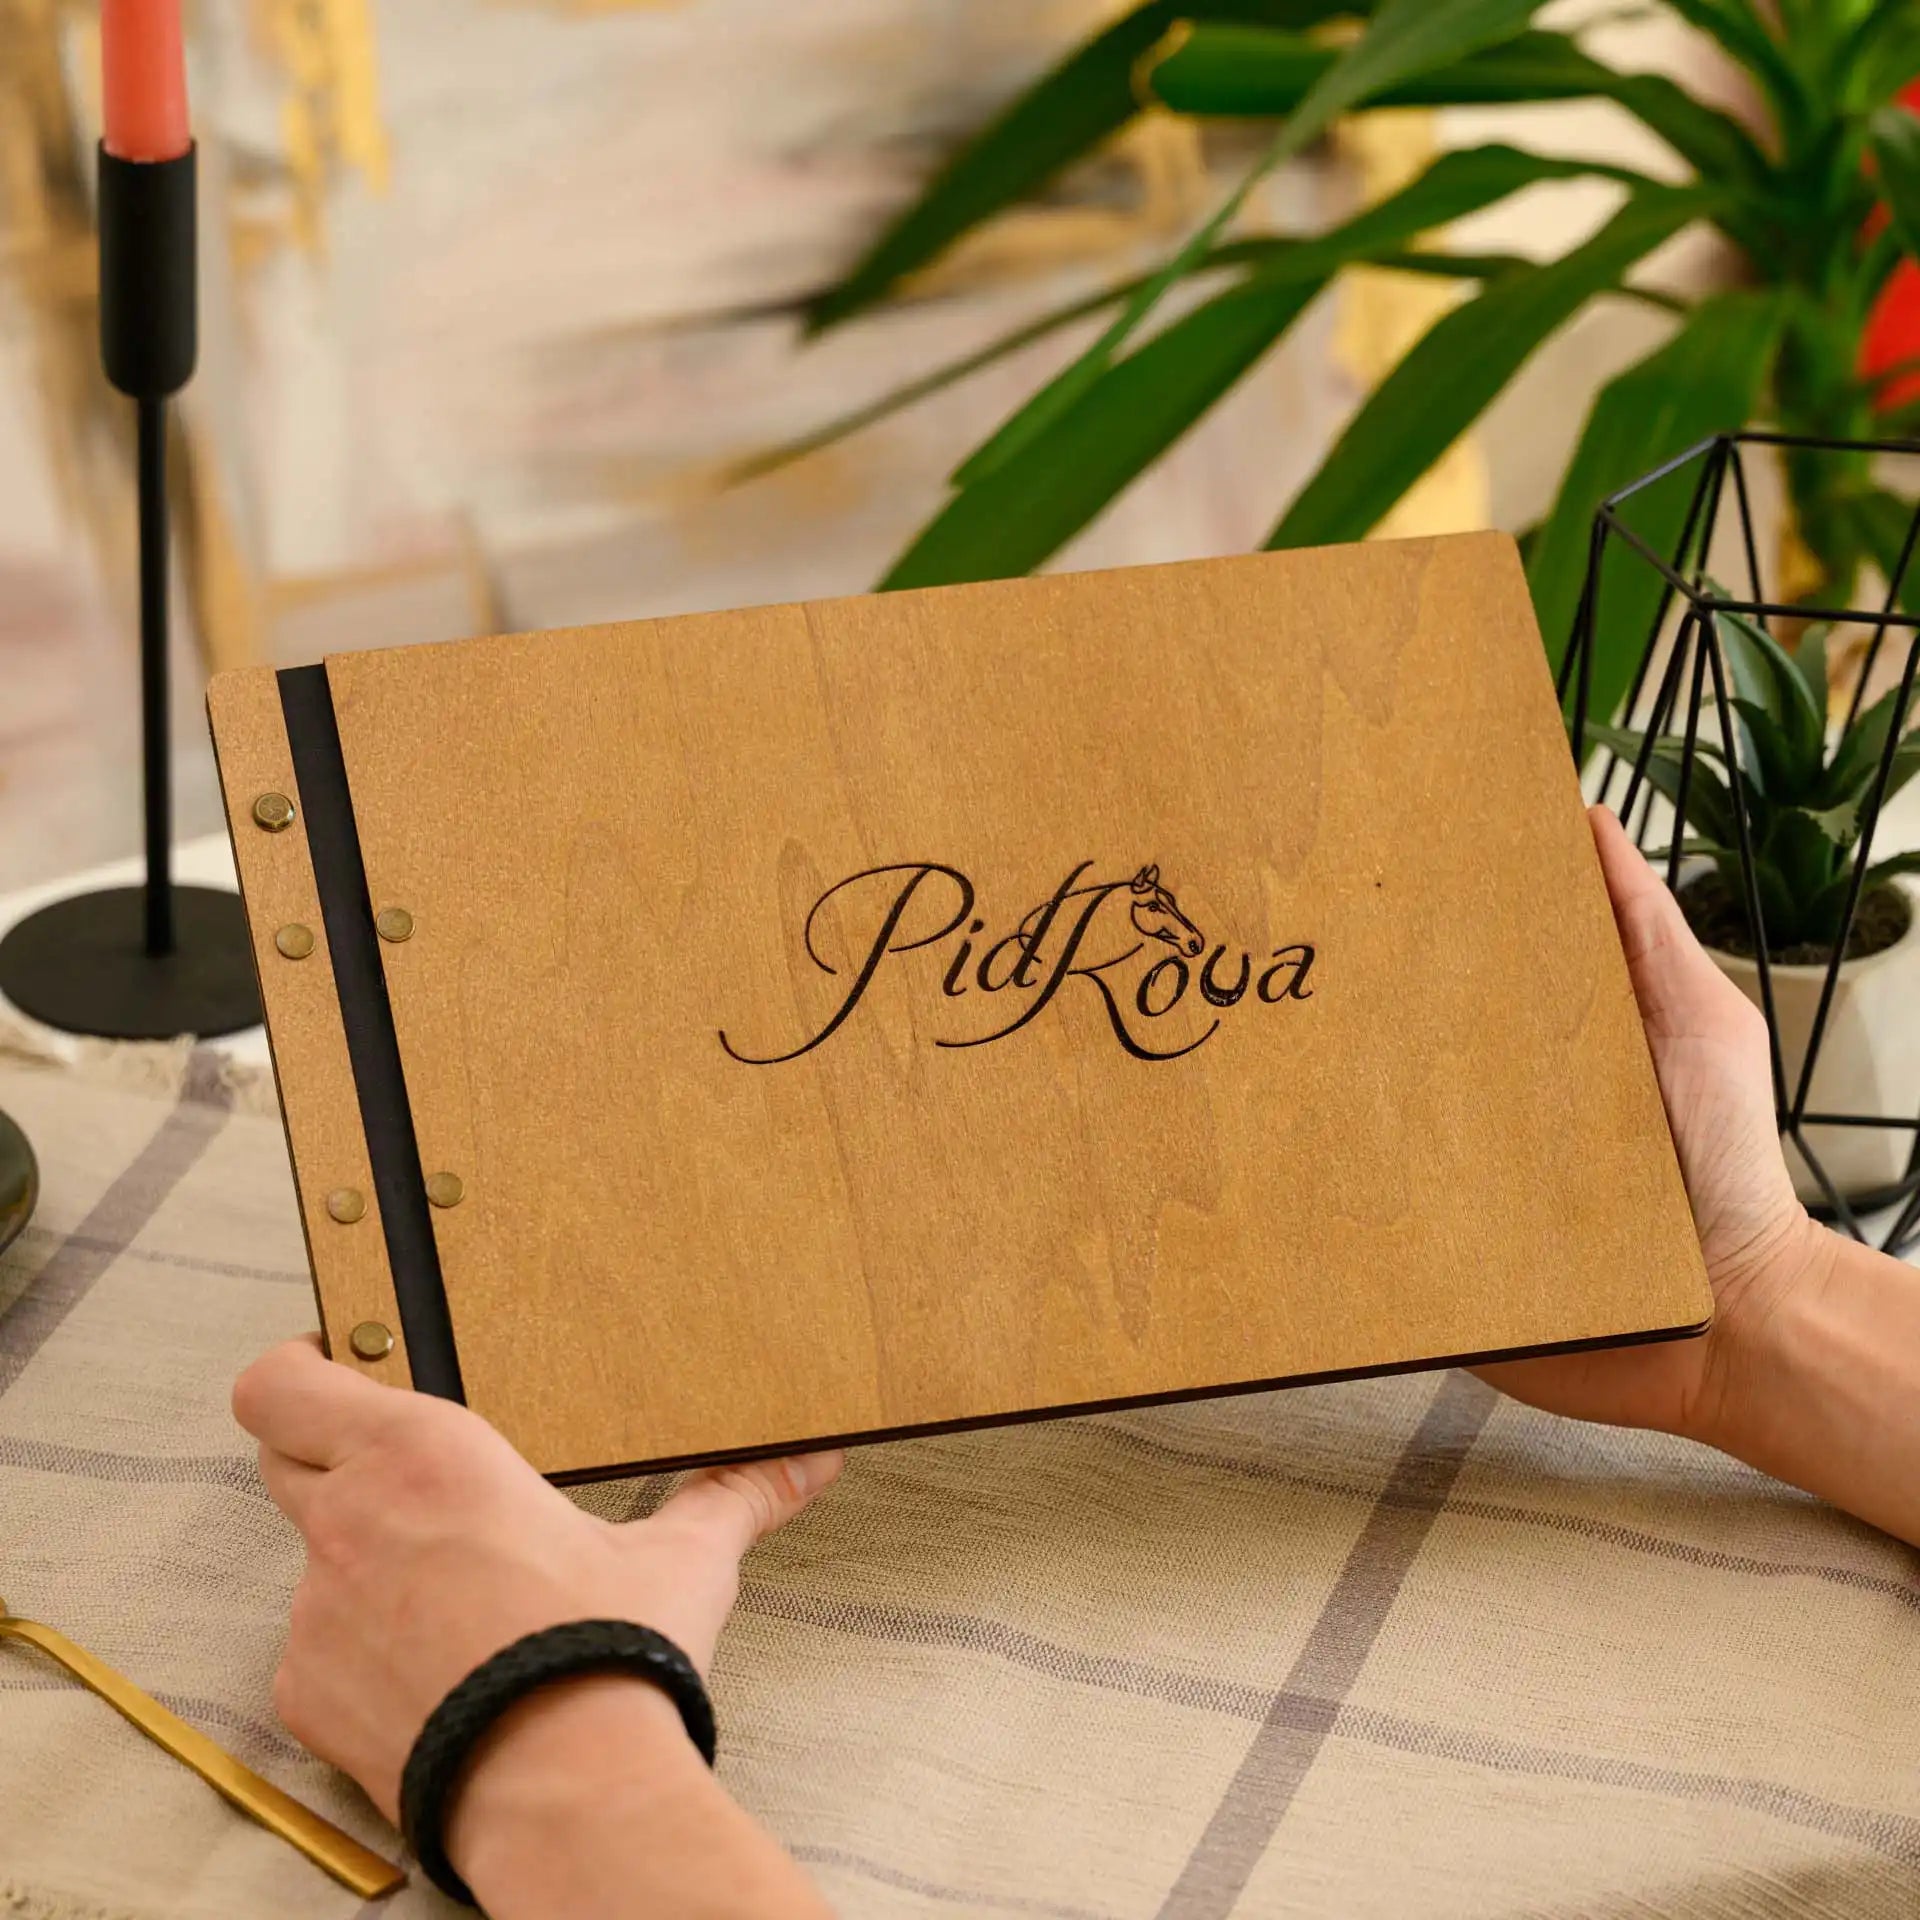 Engraved Wooden Menu Cover: Adds elegance and personalization to your menu.